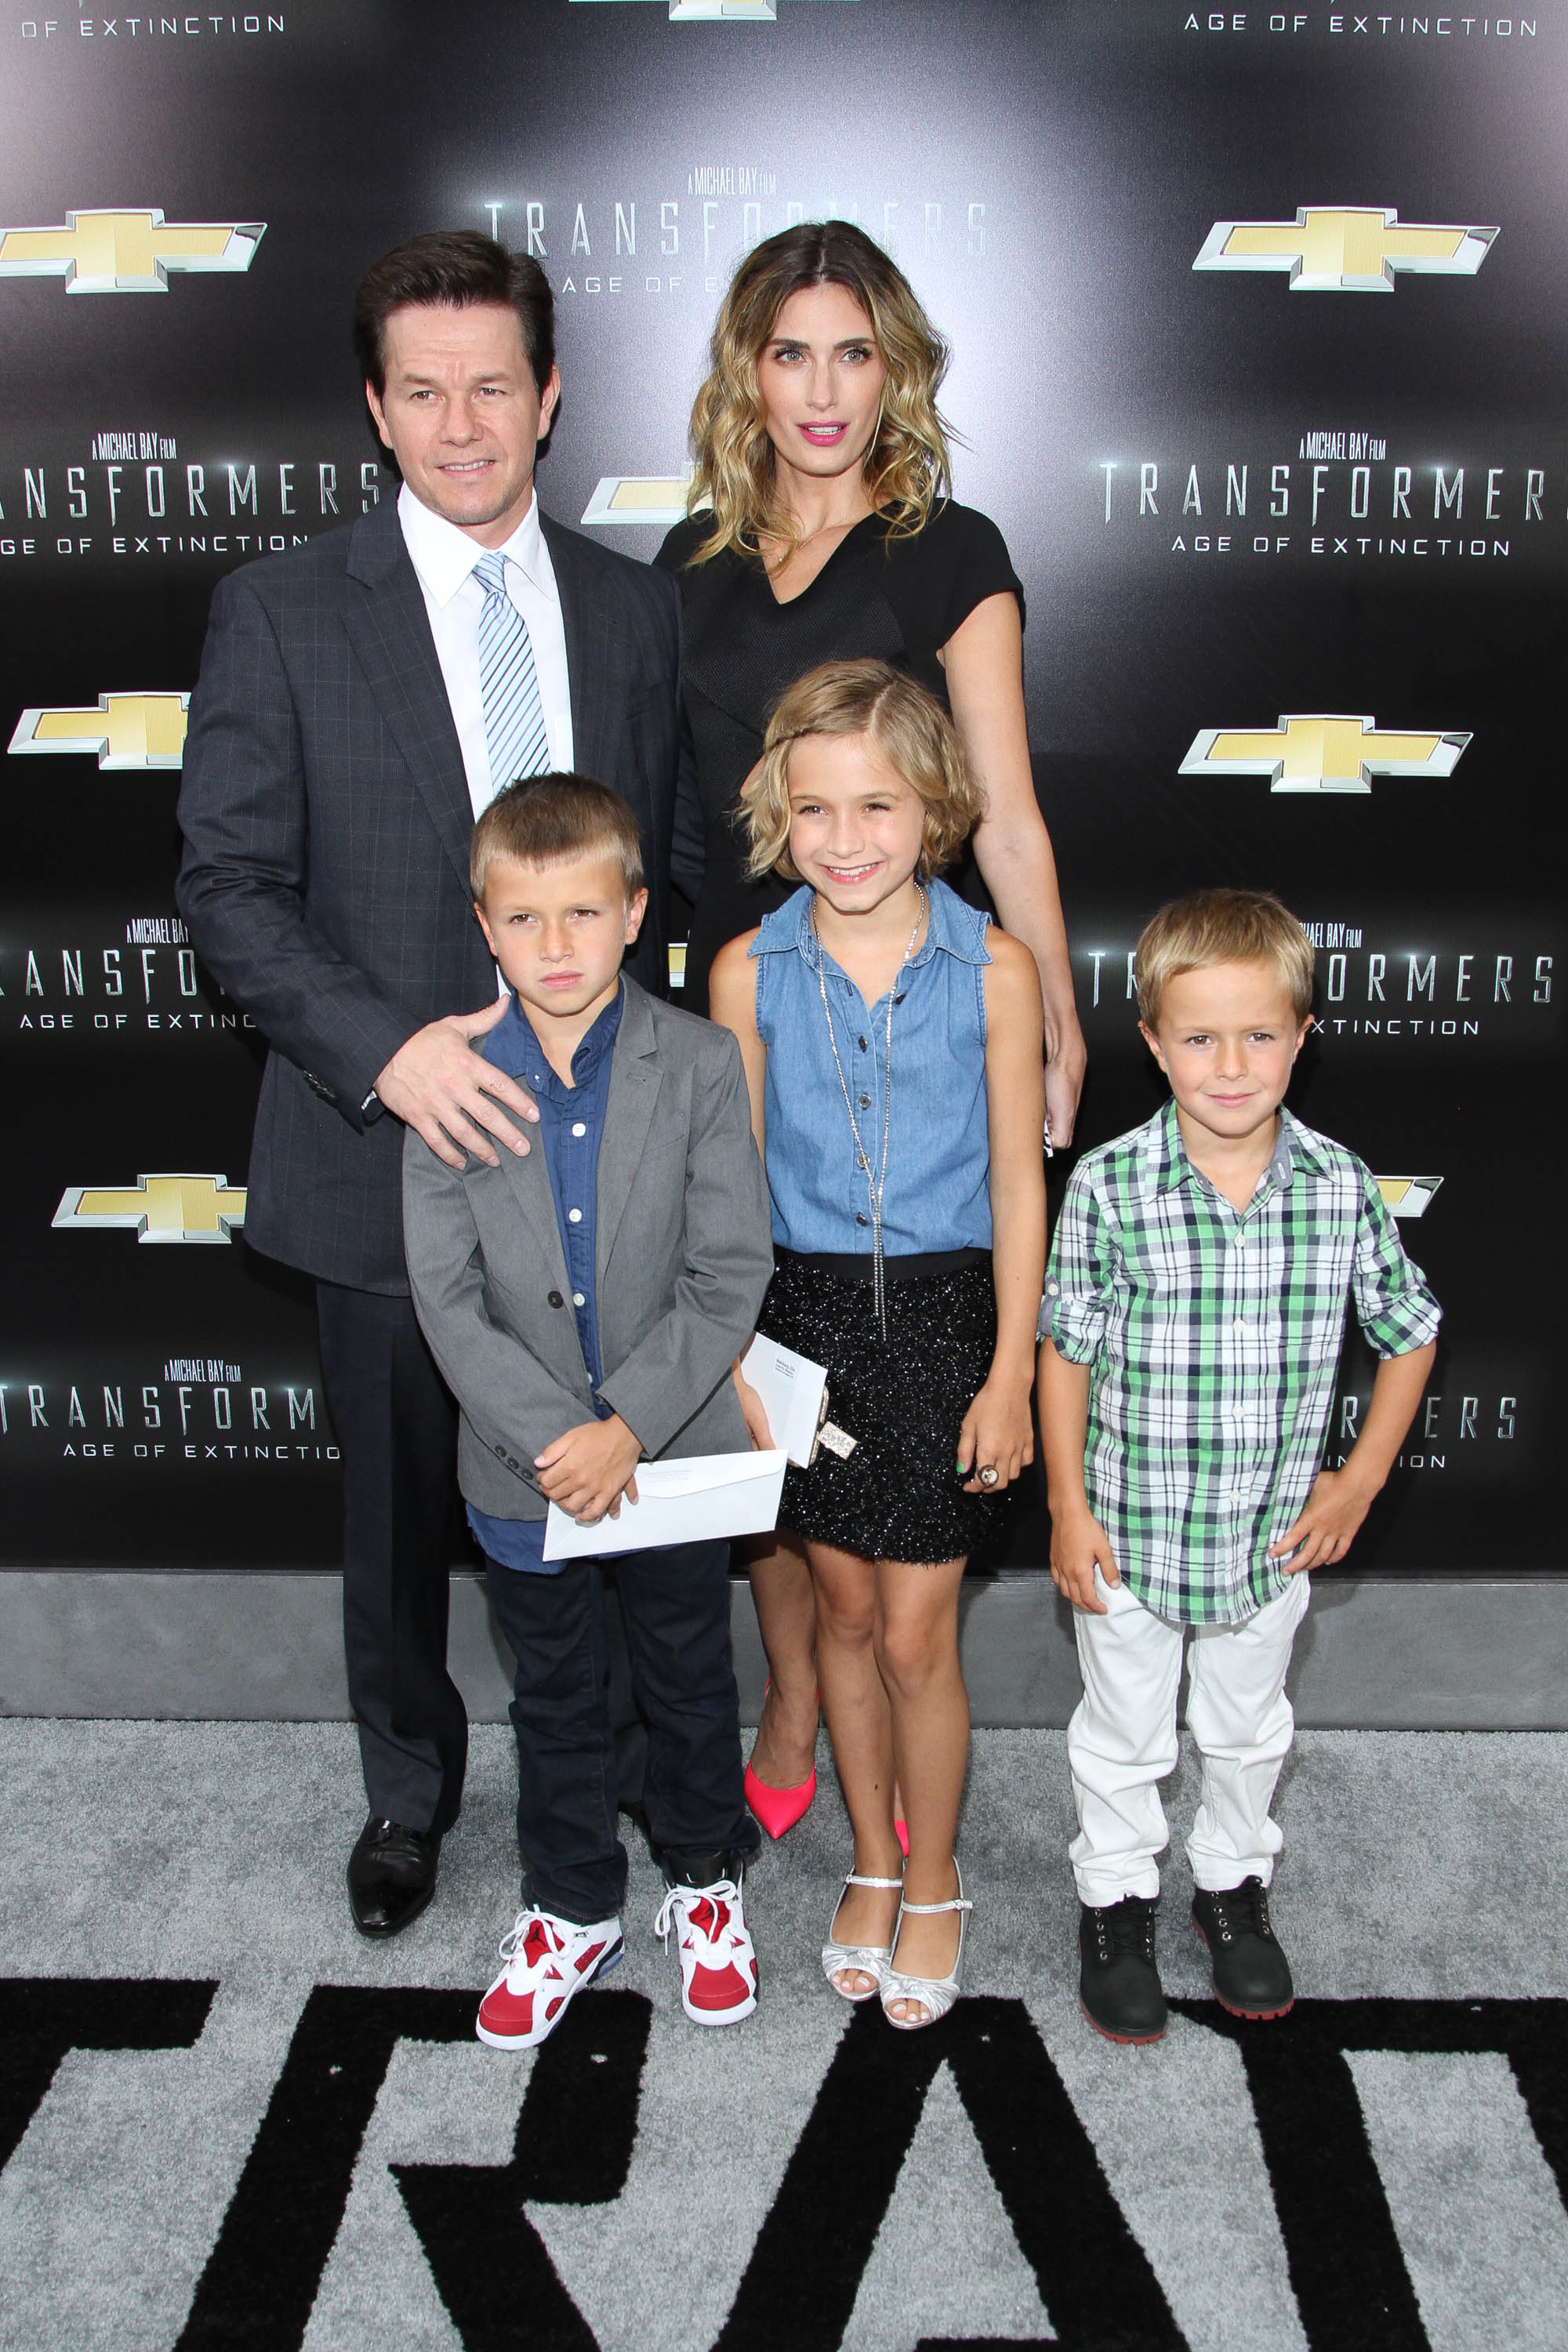 Mark Wahlberg with wife Rhea Durham and family attend "Transformers: Age Of Extinction" New York Premiere at Ziegfeld Theater on June 25, 2014 in New York City | Source: Getty Images 